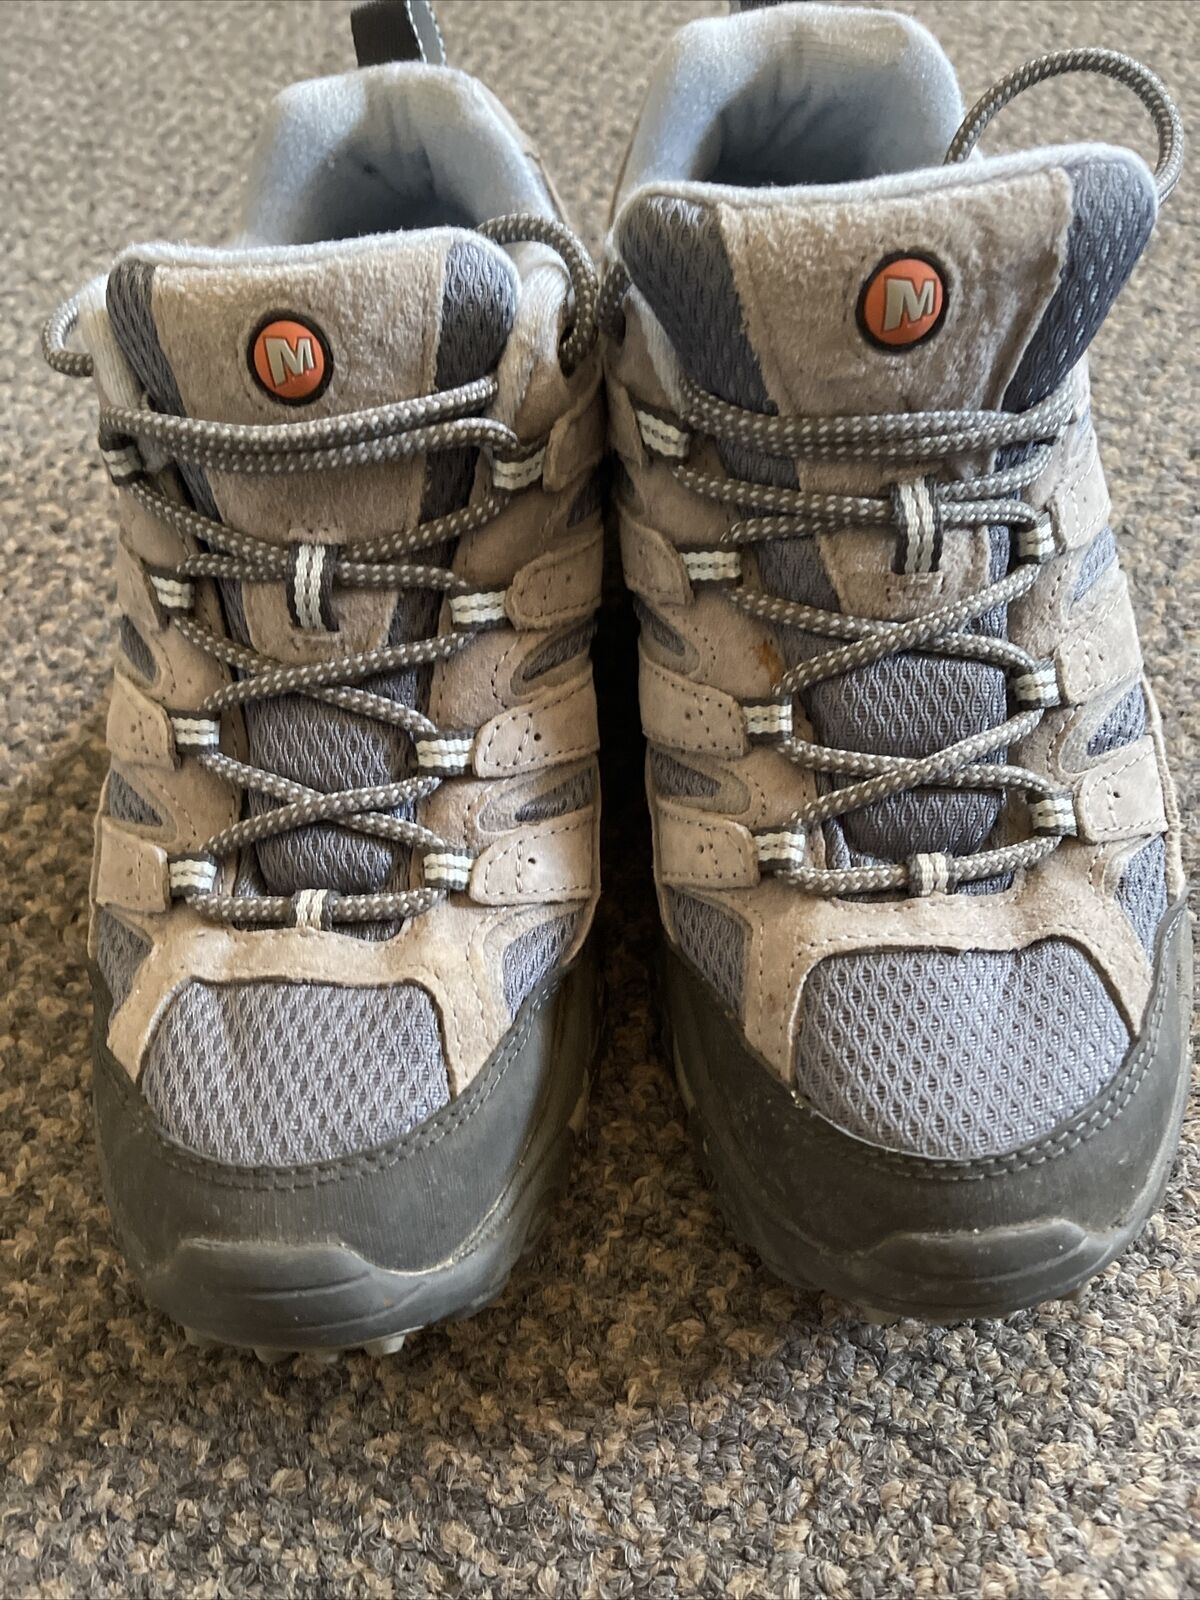 How to Clean Merrell Hiking Boots  